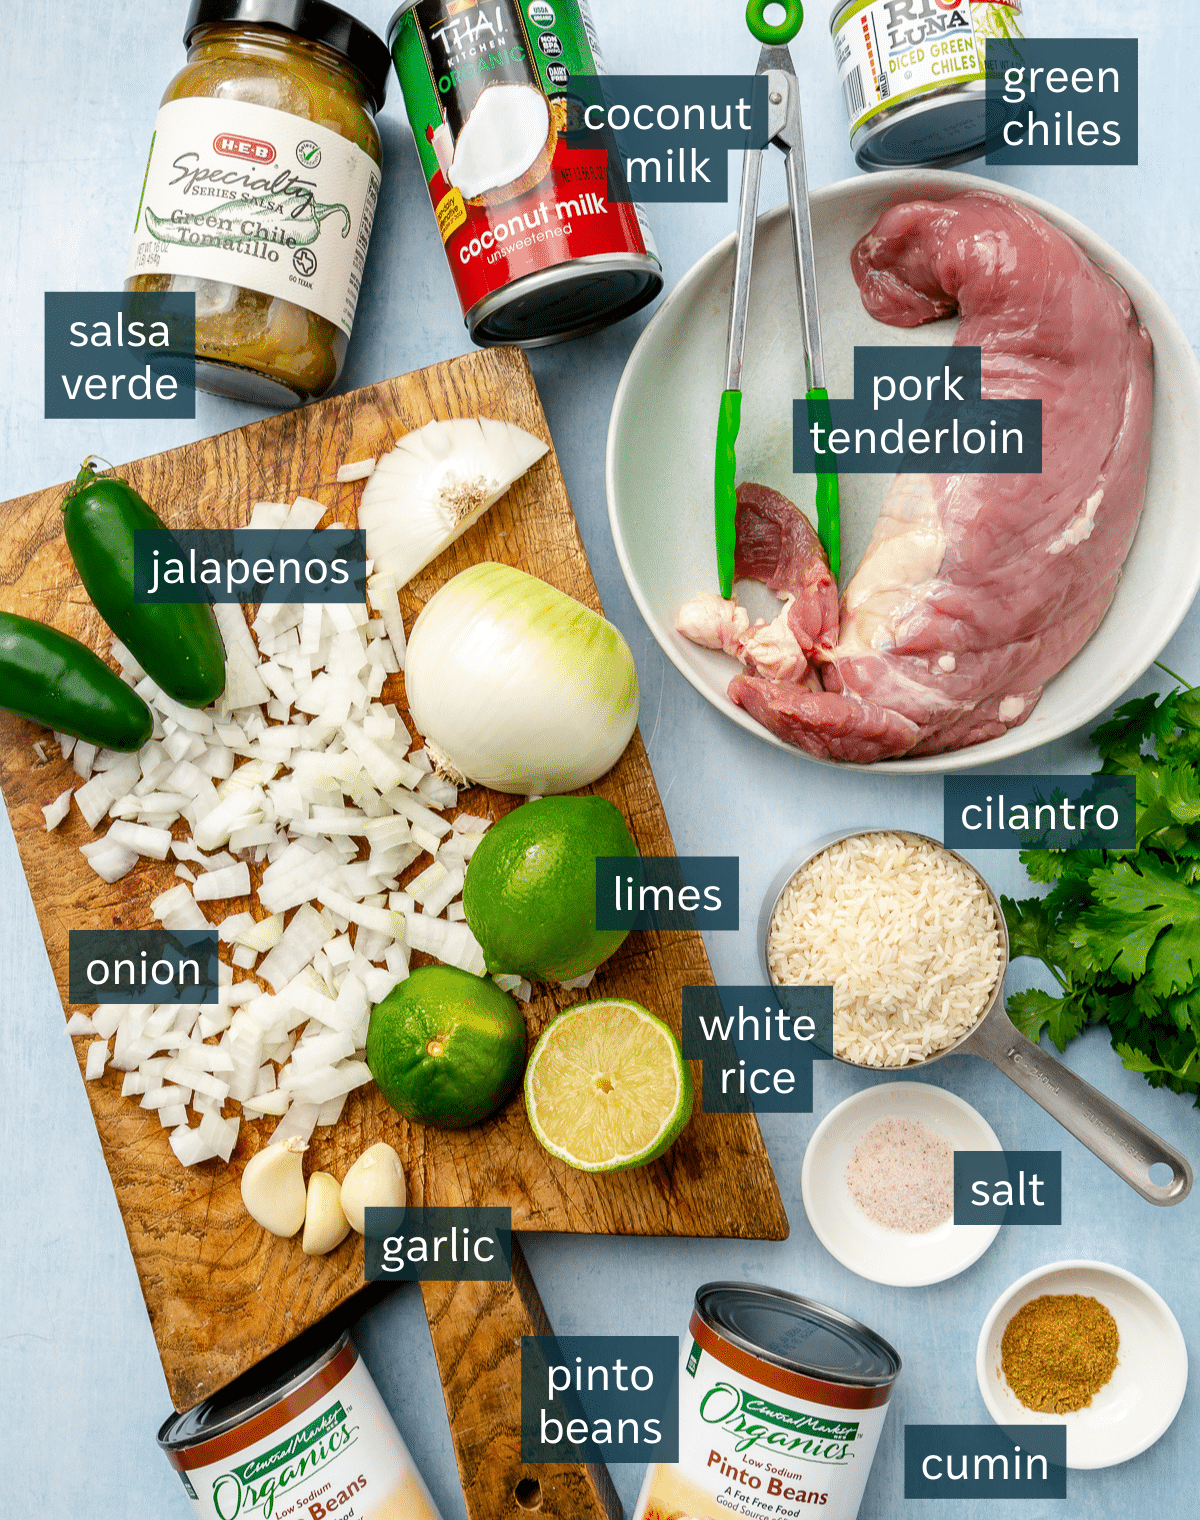 All of the ingredients needed for pork chili verde measured out on a light blue background.